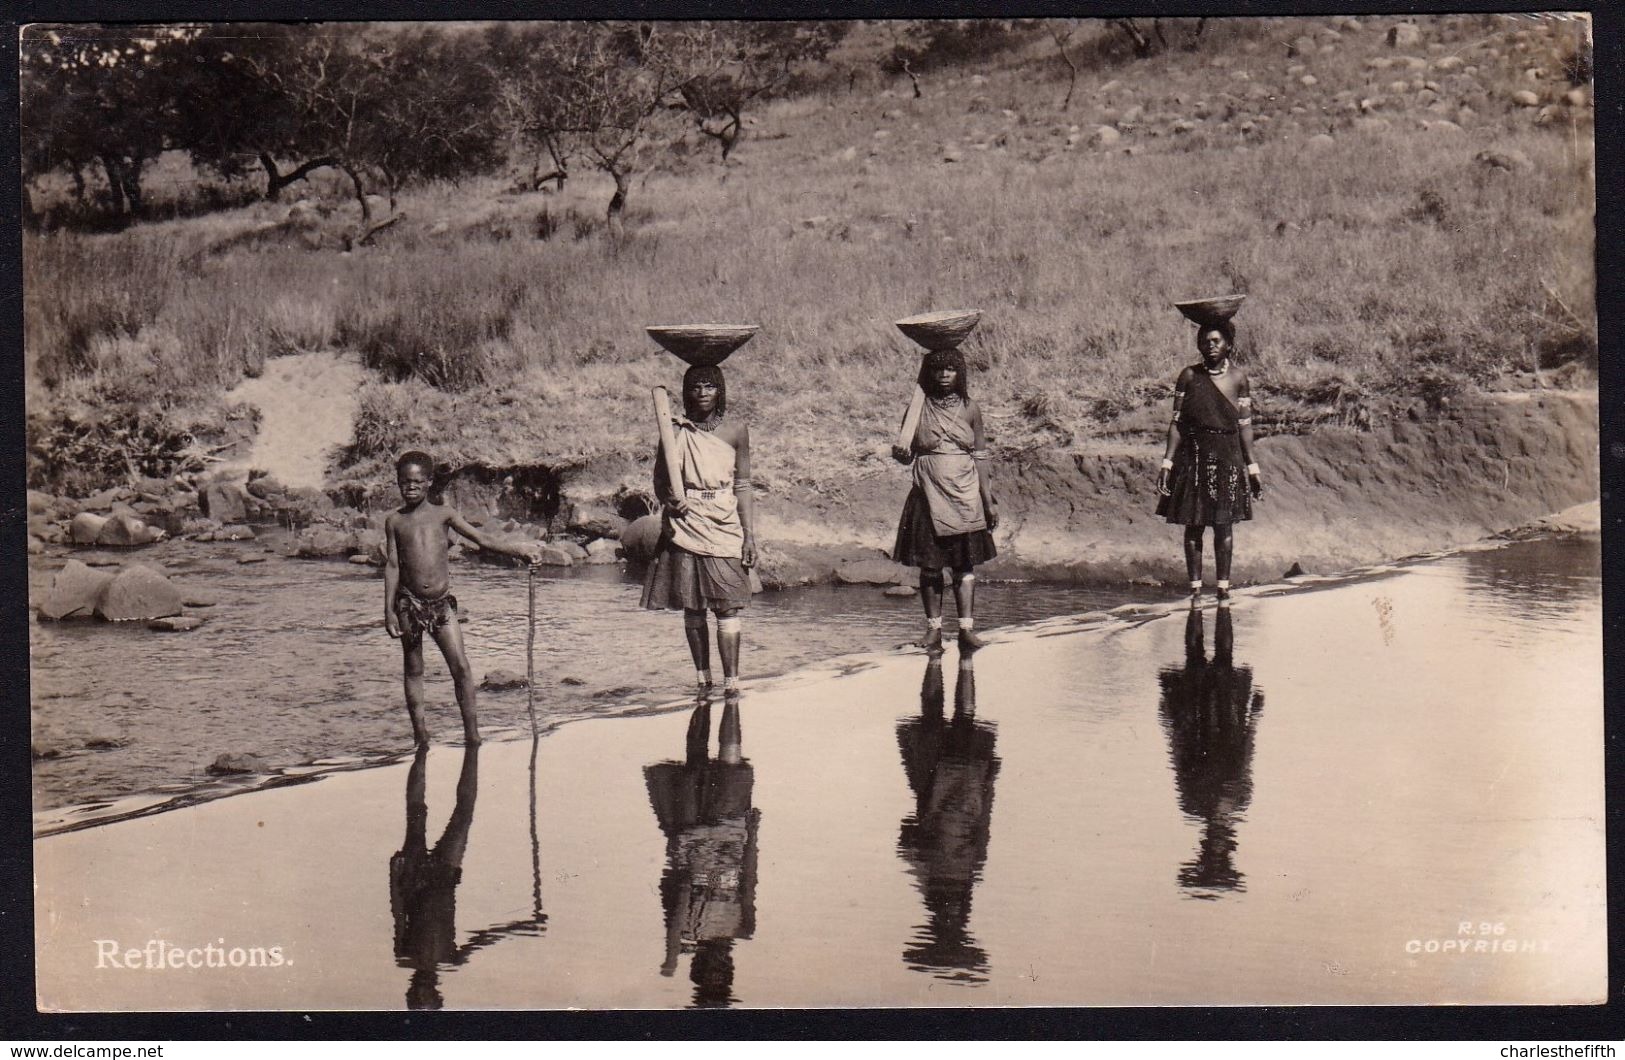 OLD SAPSCO REAL PHOTOCARD SOUTH AFRICA ** REFLECTIONS - NATIVE WOMEN ** AS NEW !! - Afrique Du Sud